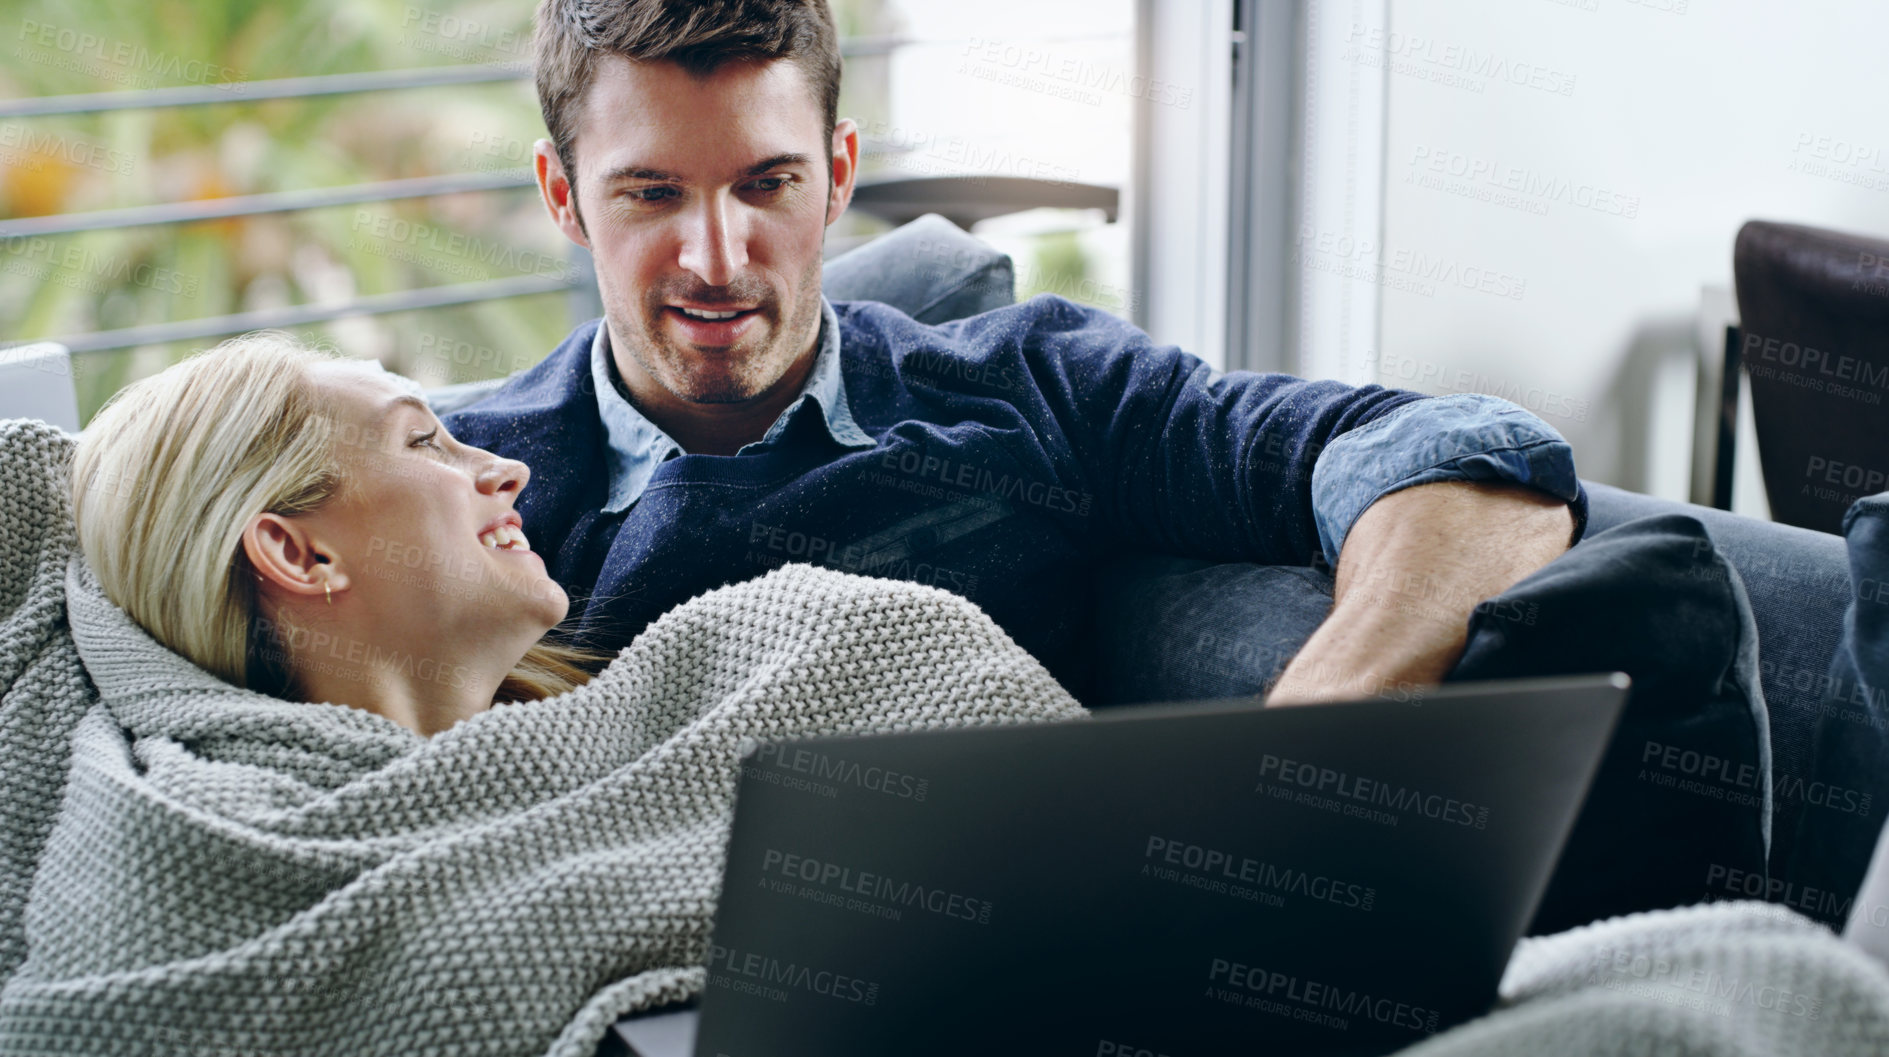 Buy stock photo Cropped shot of an affectionate young couple watching a movie on their laptop while relaxing on the sofa at home